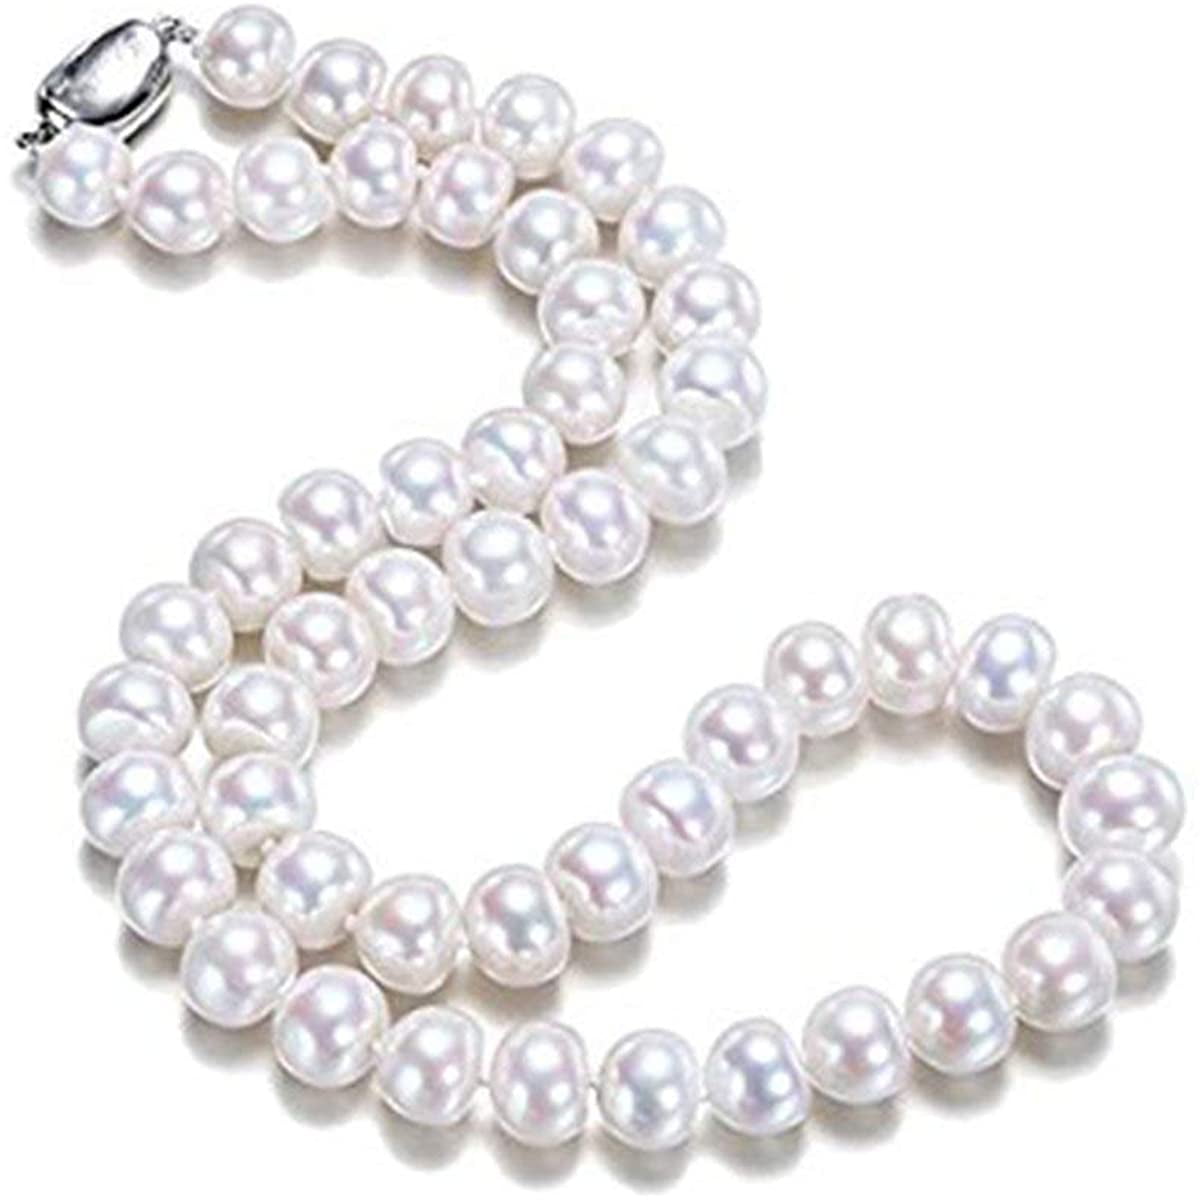 Long 25"-100" 7-8mm Natural White Akoya Cultured Pearl Necklace gift 